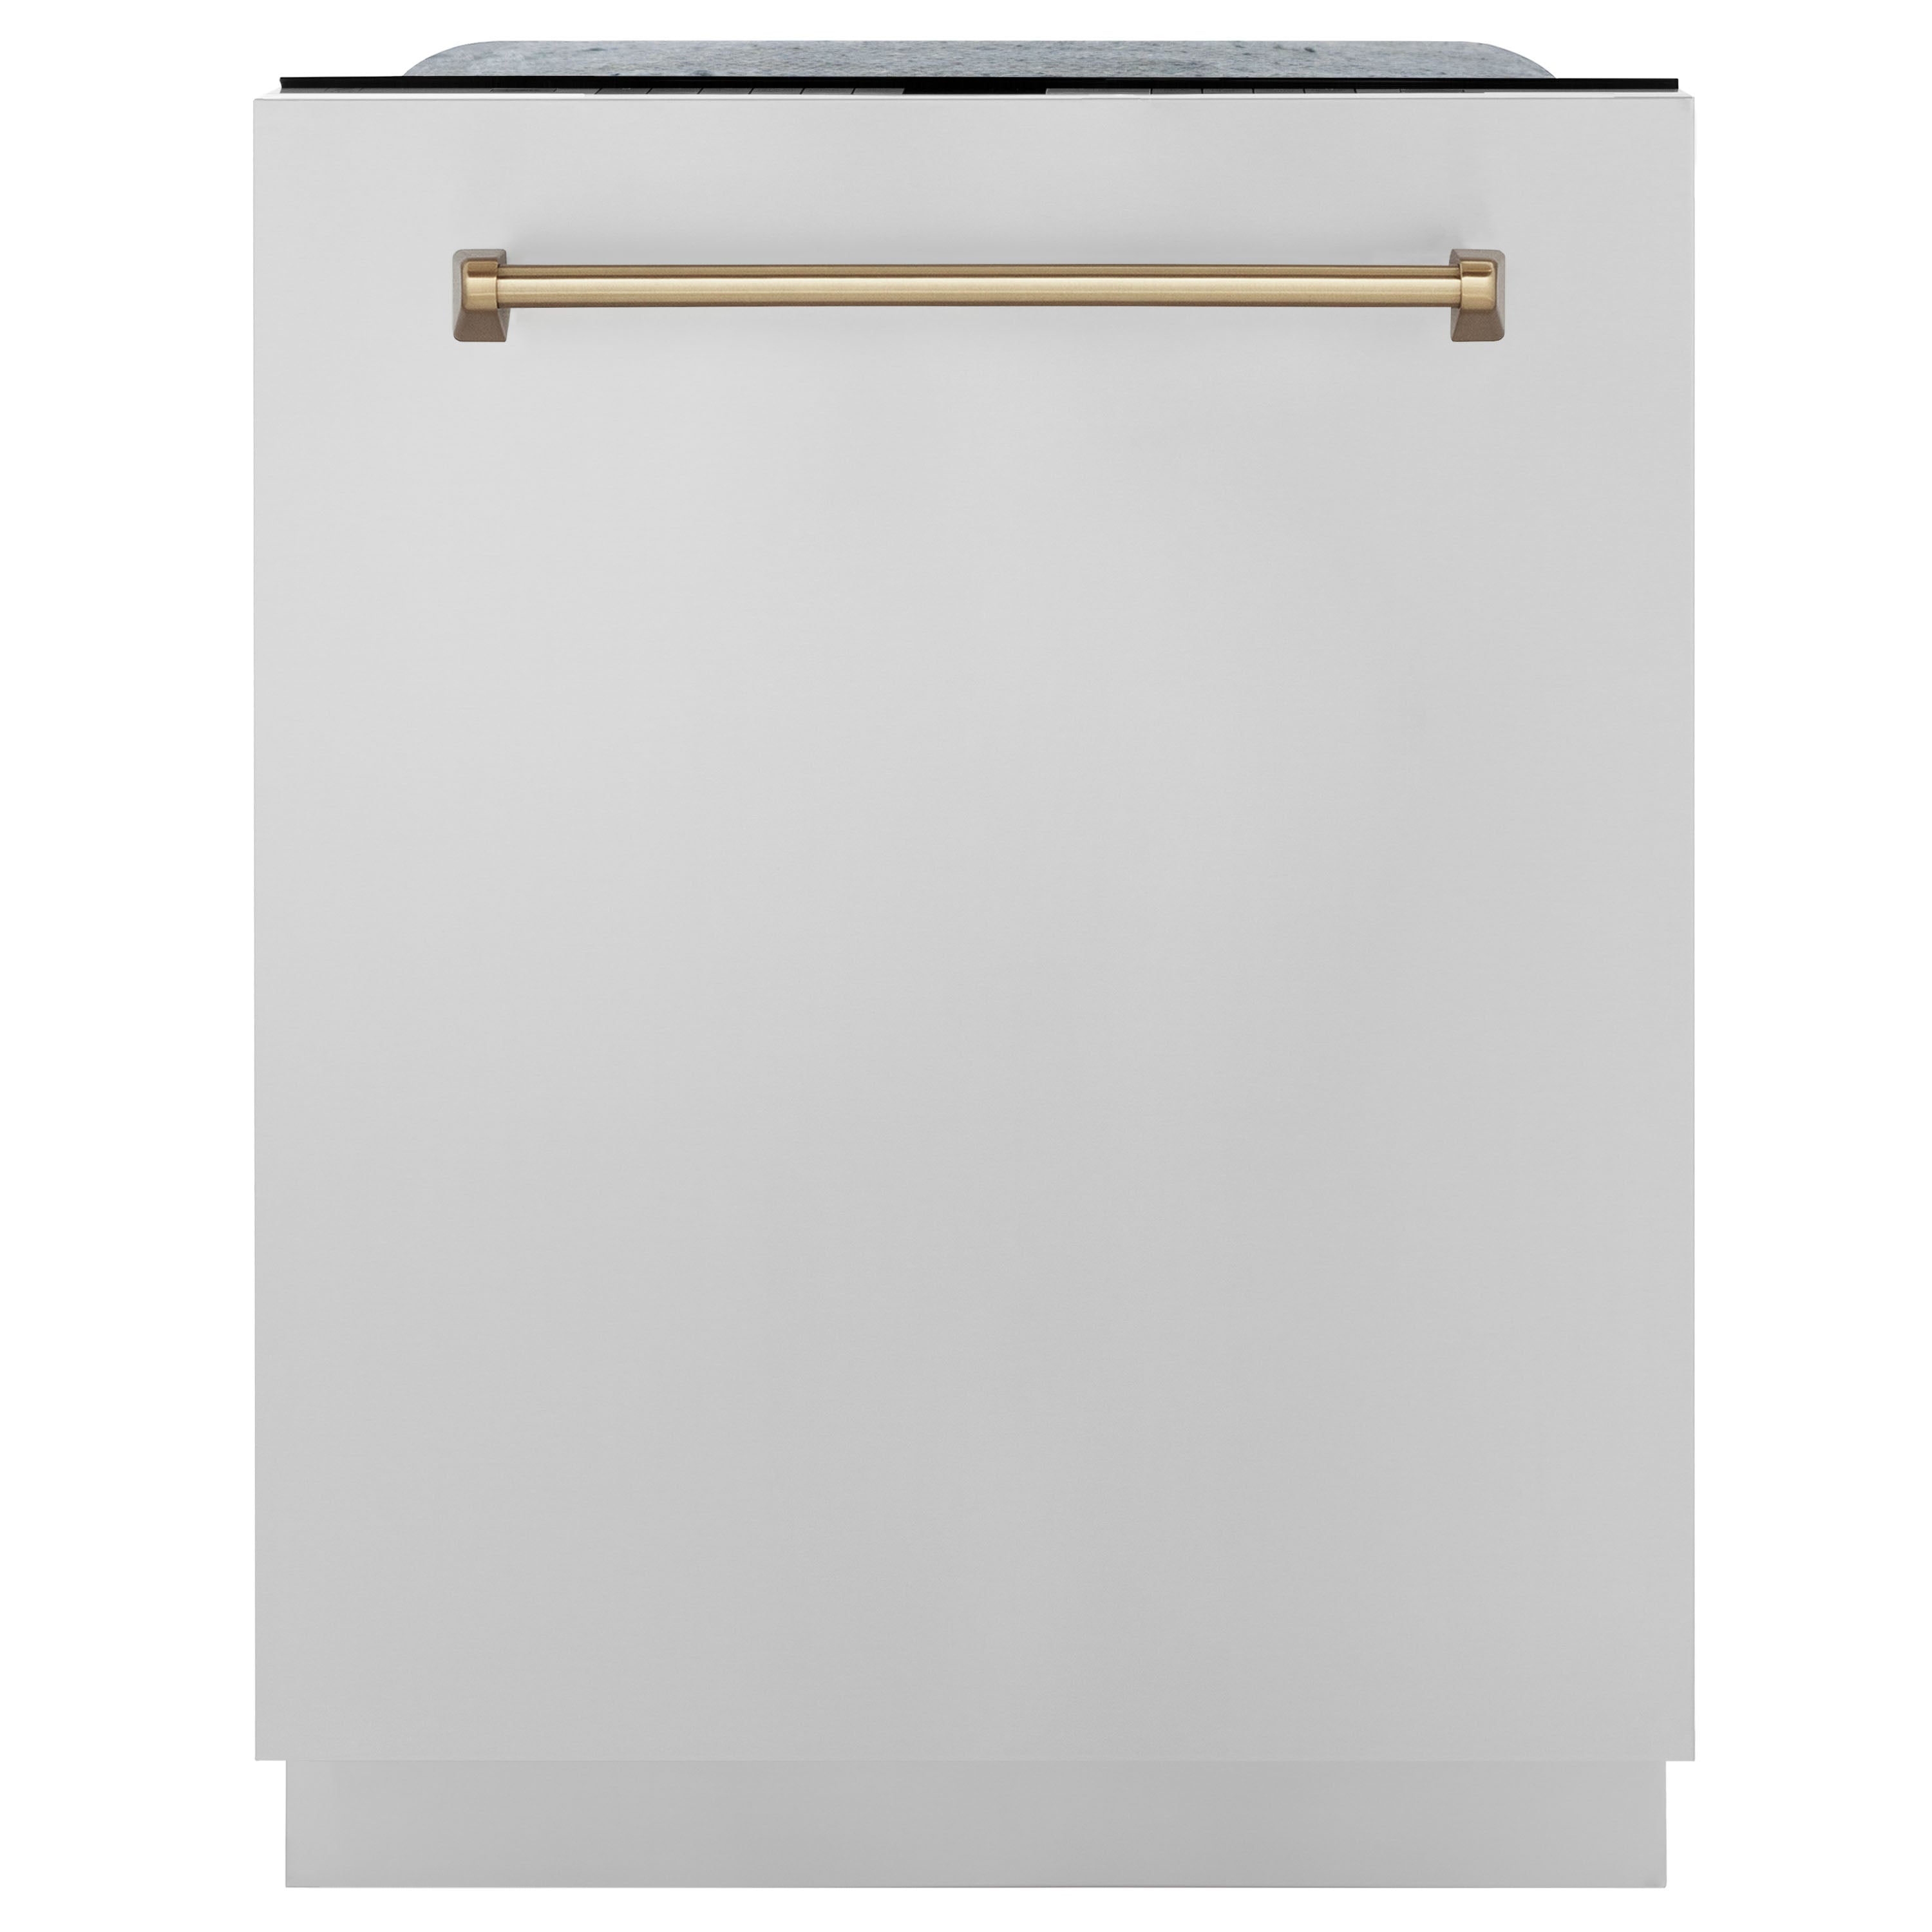 ZLINE Autograph Edition 24" Monument Series 3rd Rack Top Touch Control Tall Tub Dishwasher in Stainless Steel with Champagne Bronze Handle, 45dBa (DWMTZ-304-24-CB)